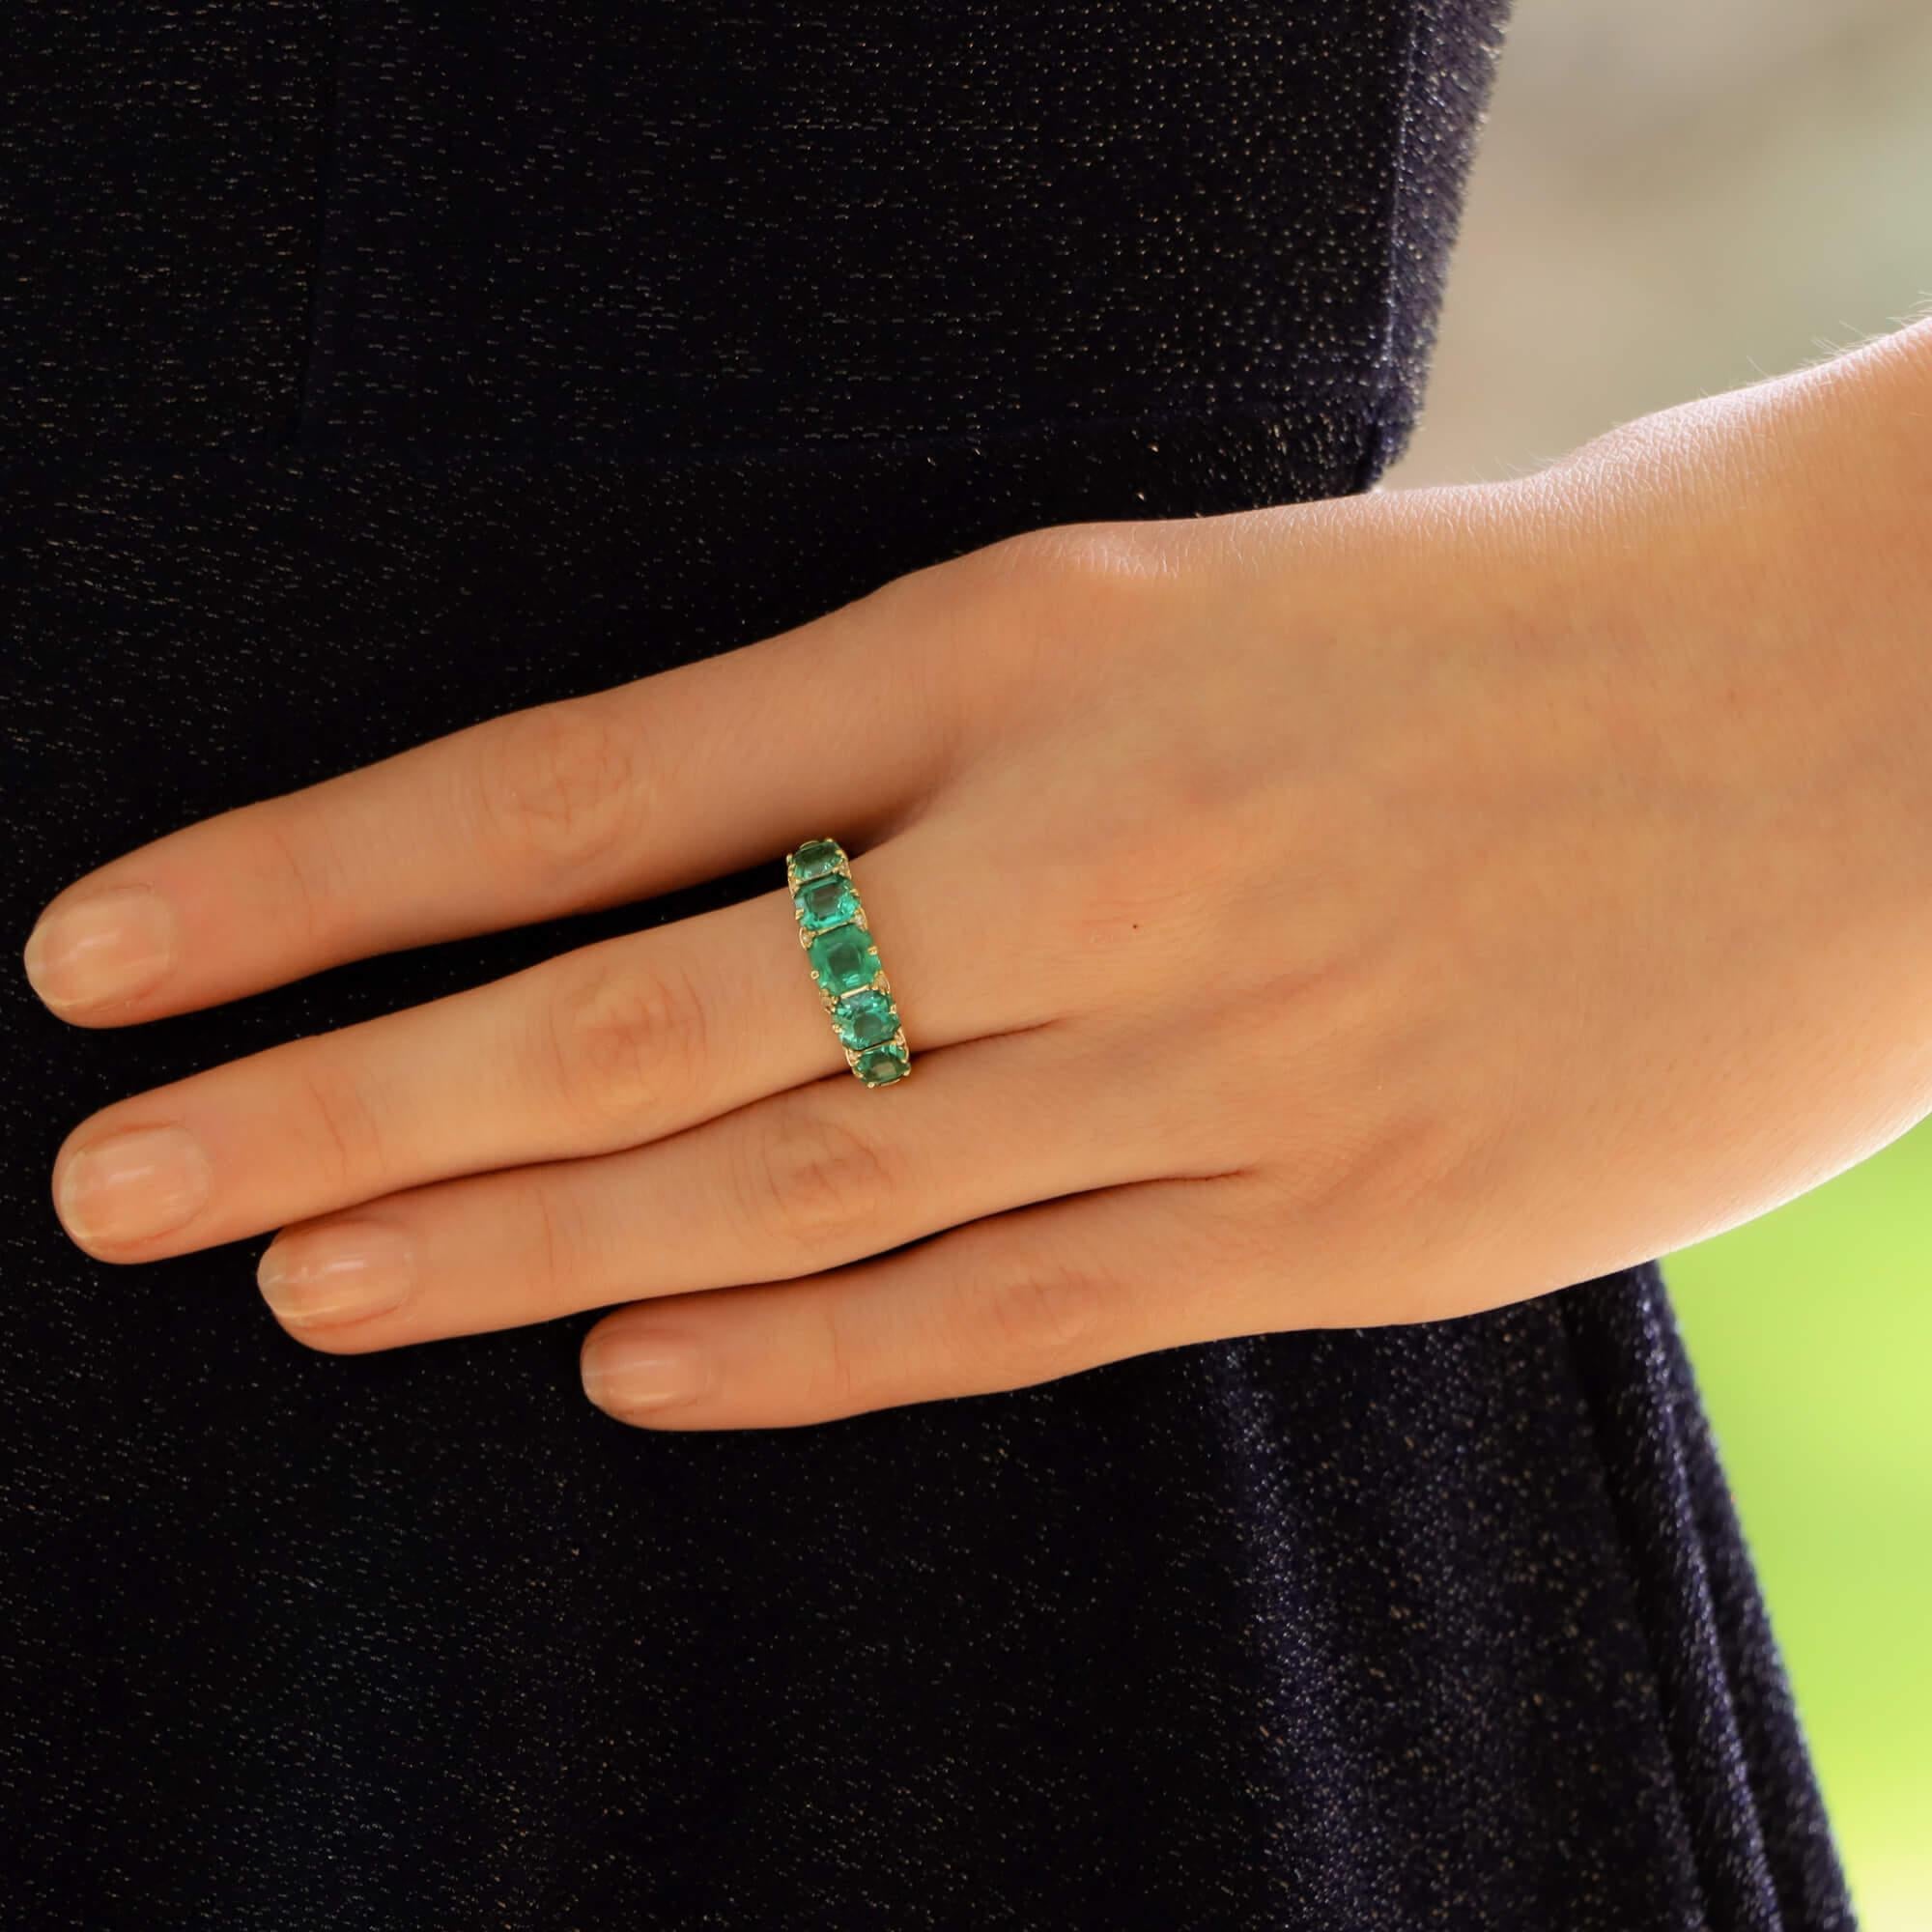 A beautiful Victorian emerald and diamond five stone ring set in 18k yellow gold. 

The ring is set with five vibrant square cut emeralds, all of which are perfectly matched in colour. These emeralds evenly graduate in size as they travel across the